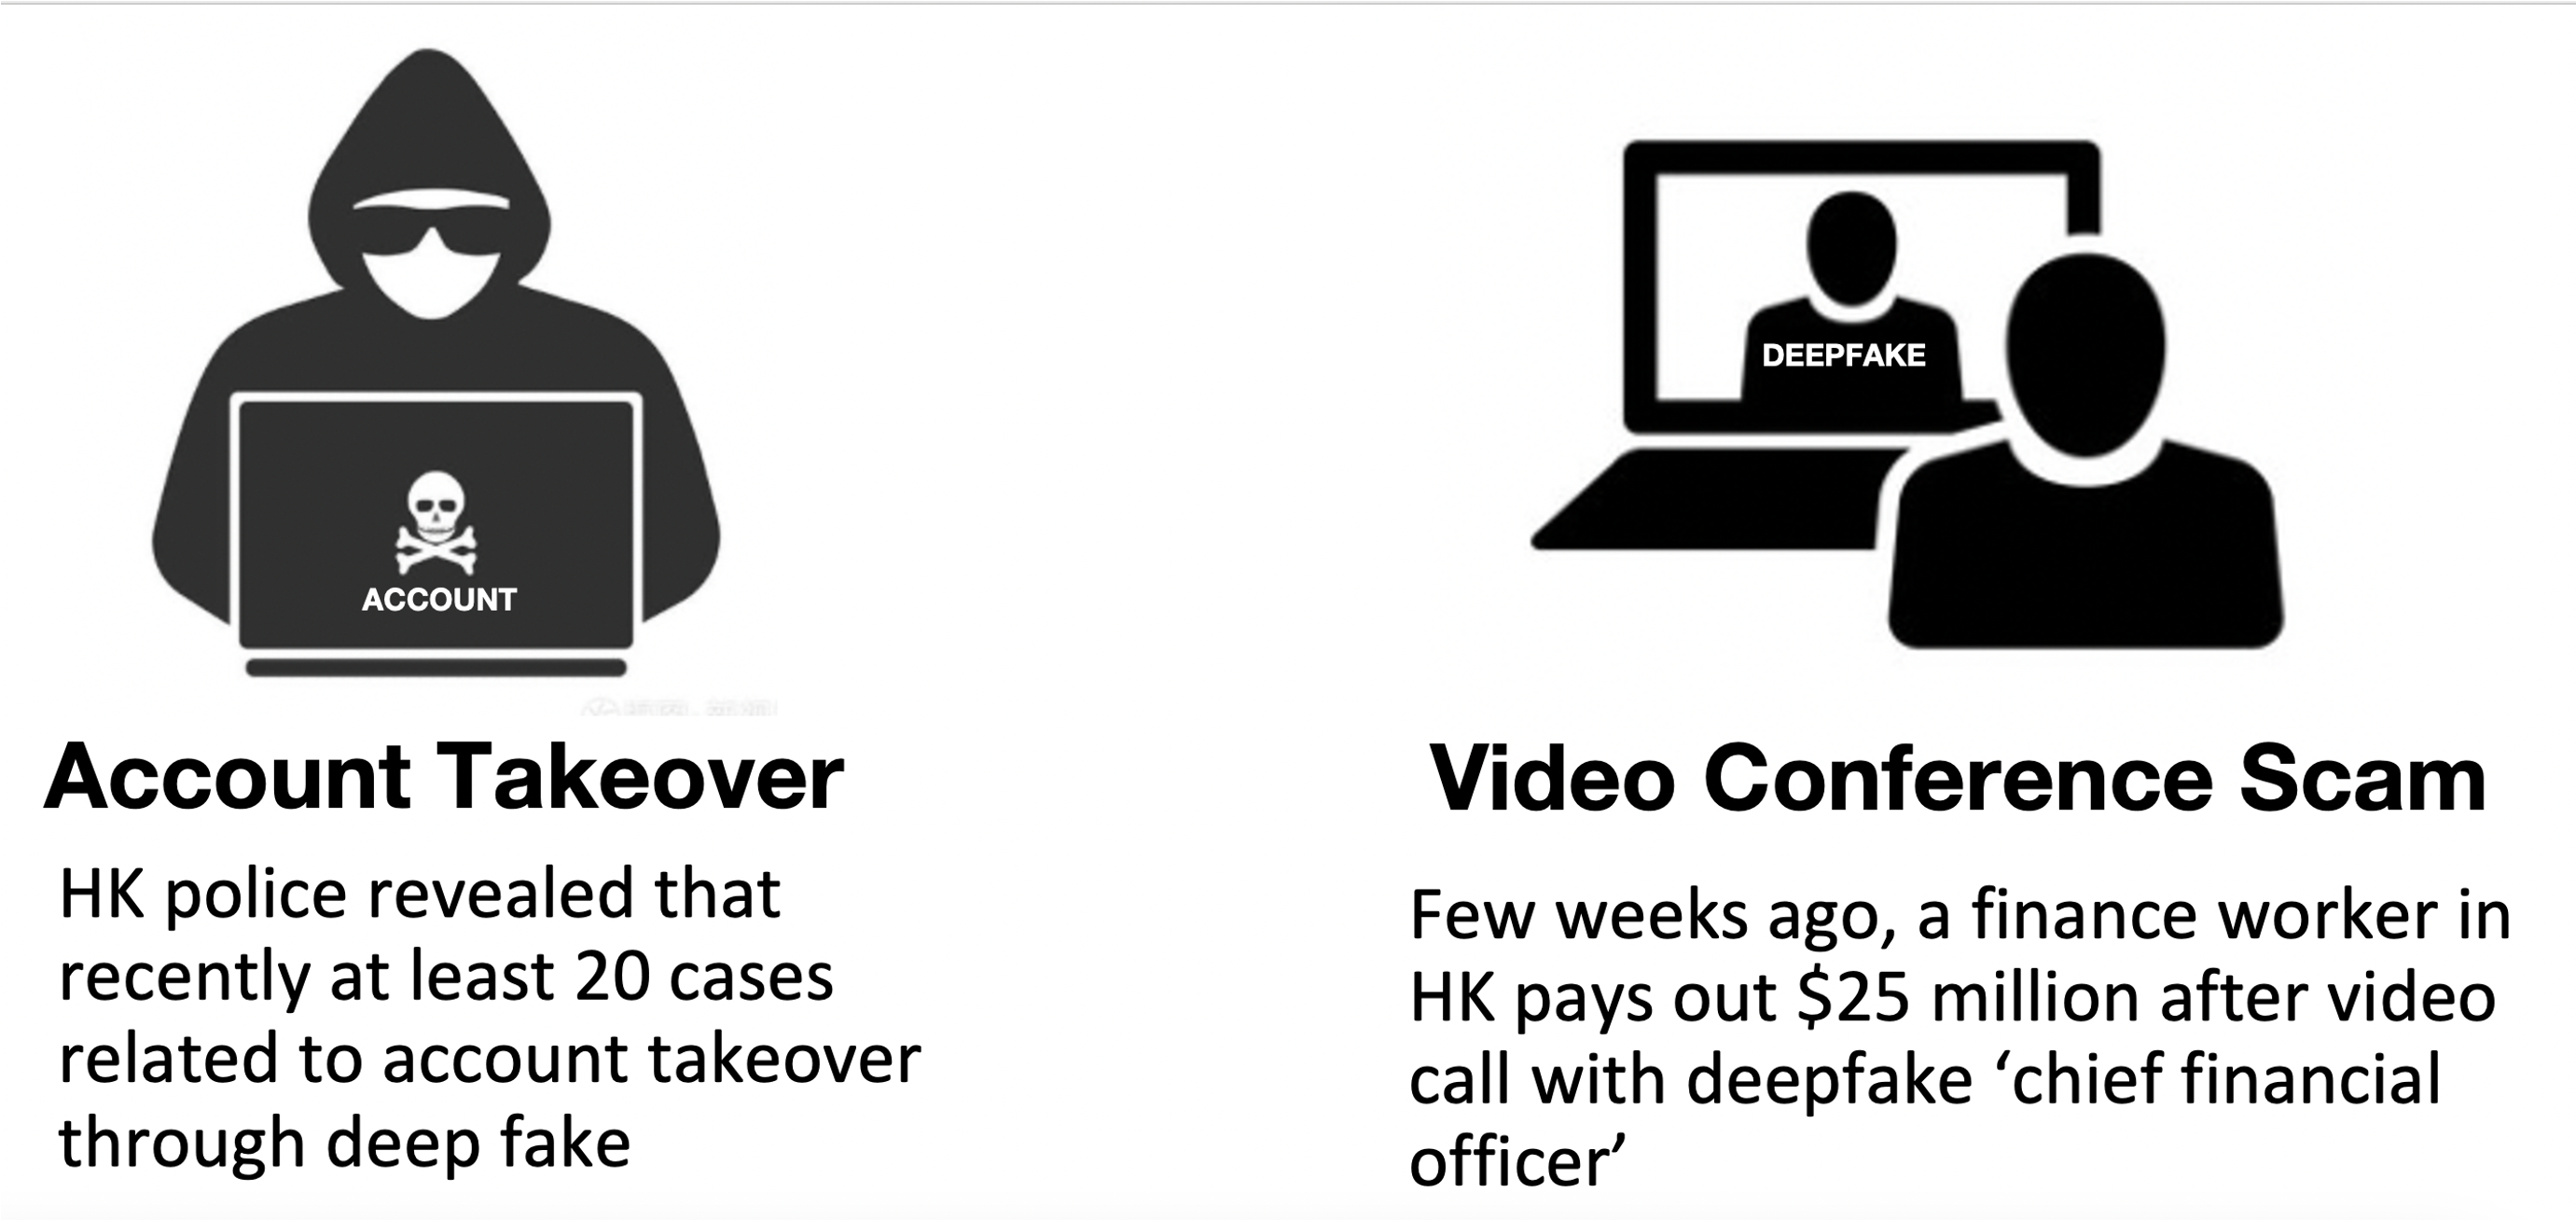 Deepfake attacks appers more and more in account take over and video conference scams